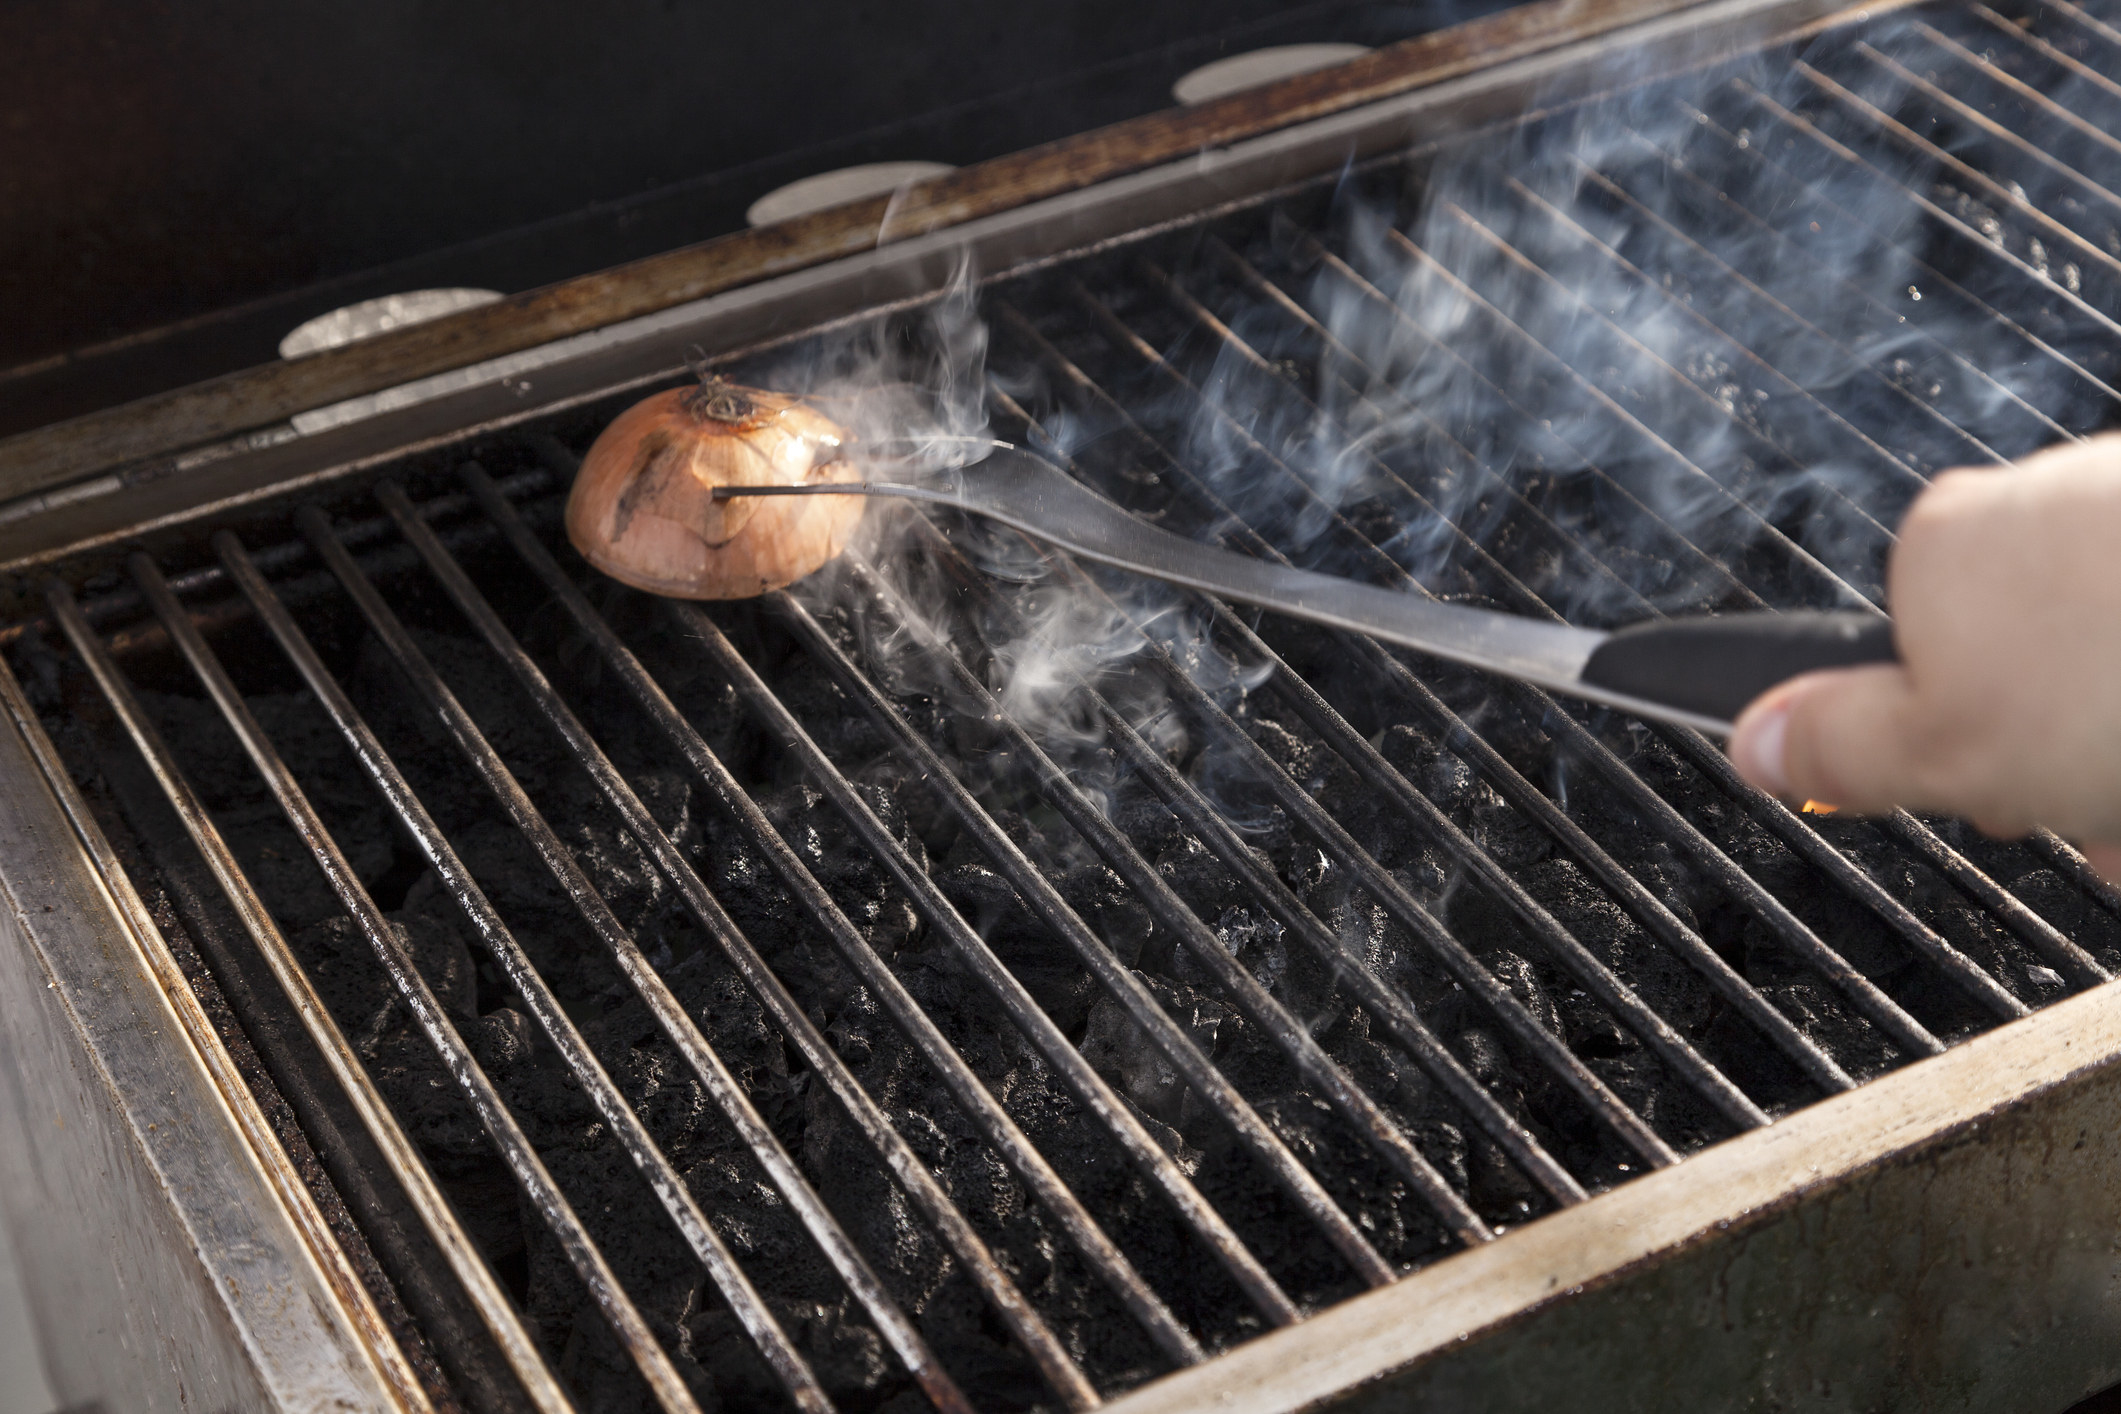 Cleaning a grill with a halved onion.